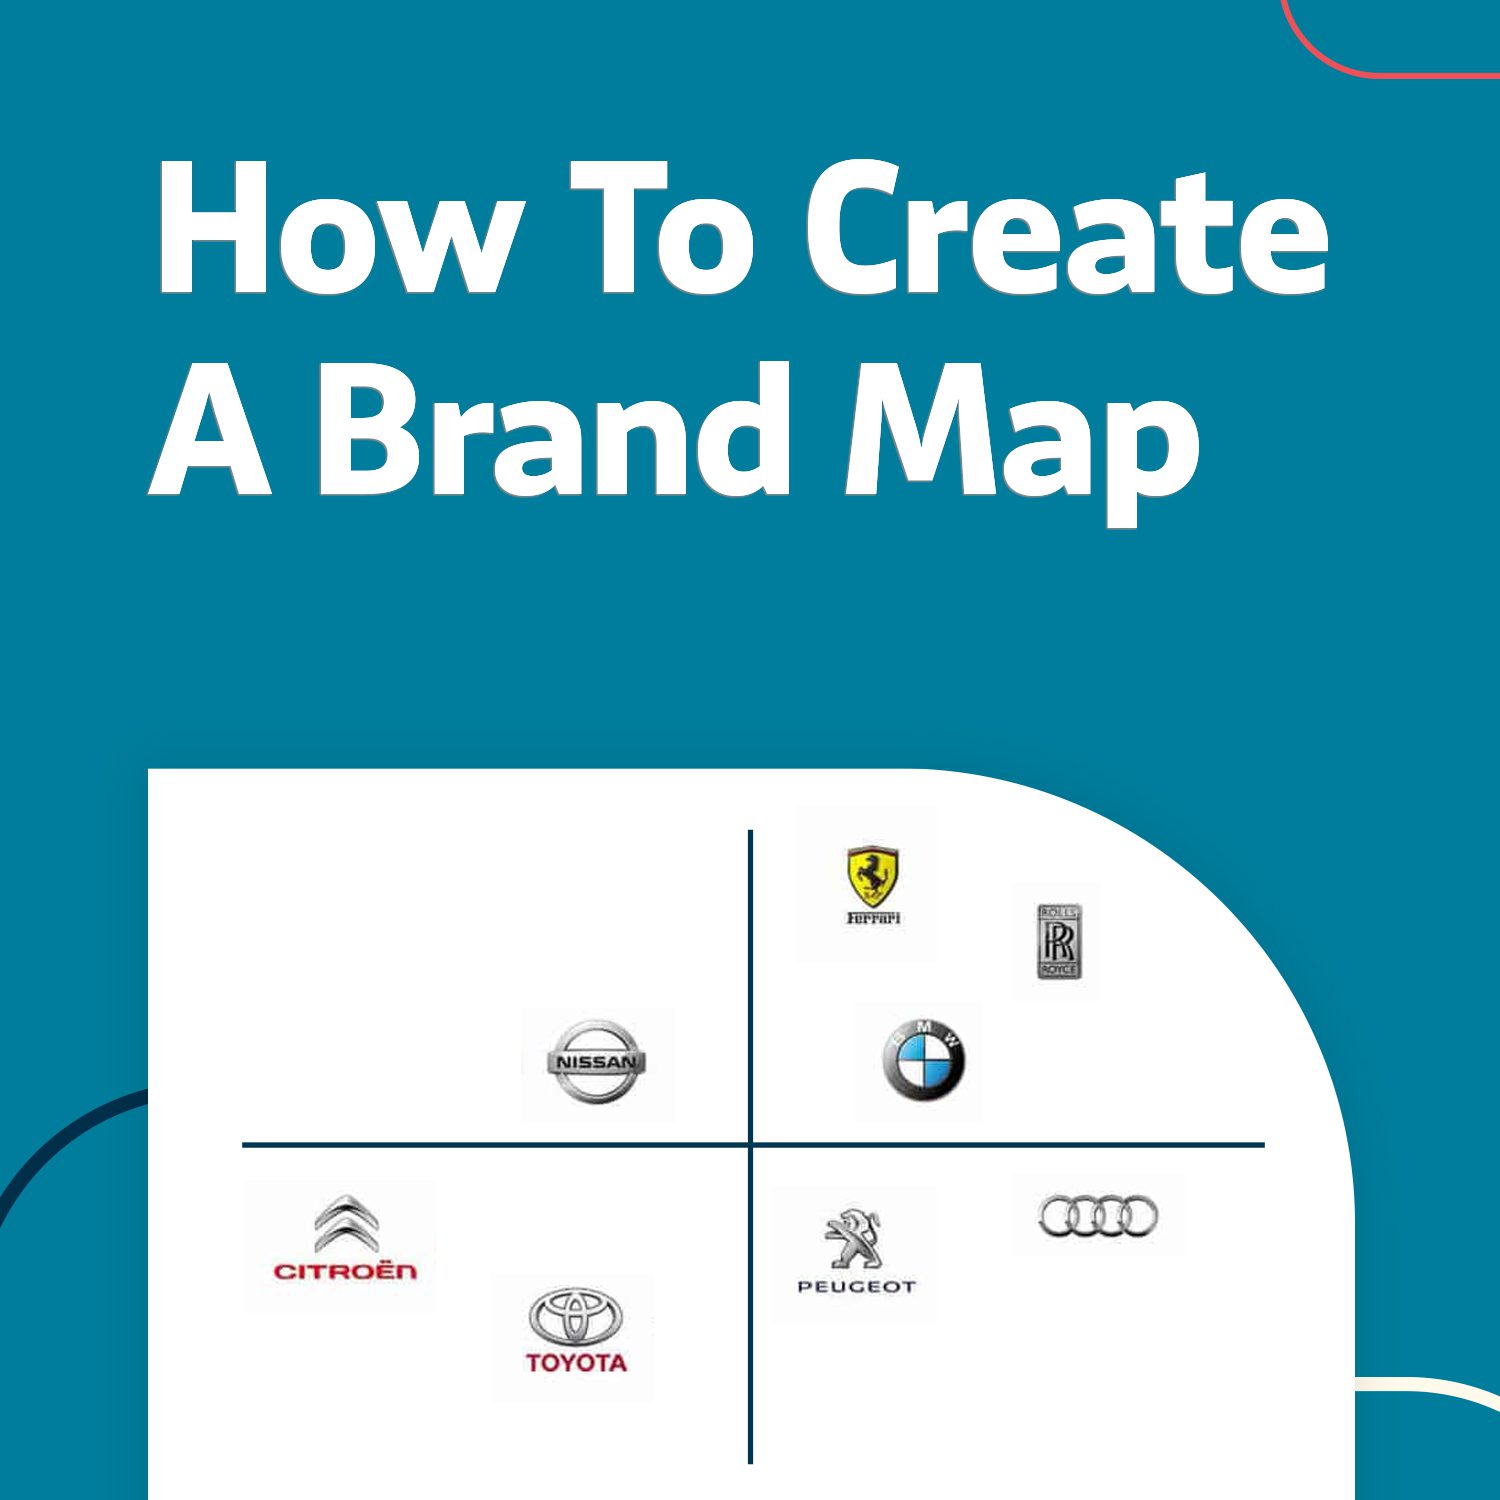 How to Create a Brand Map